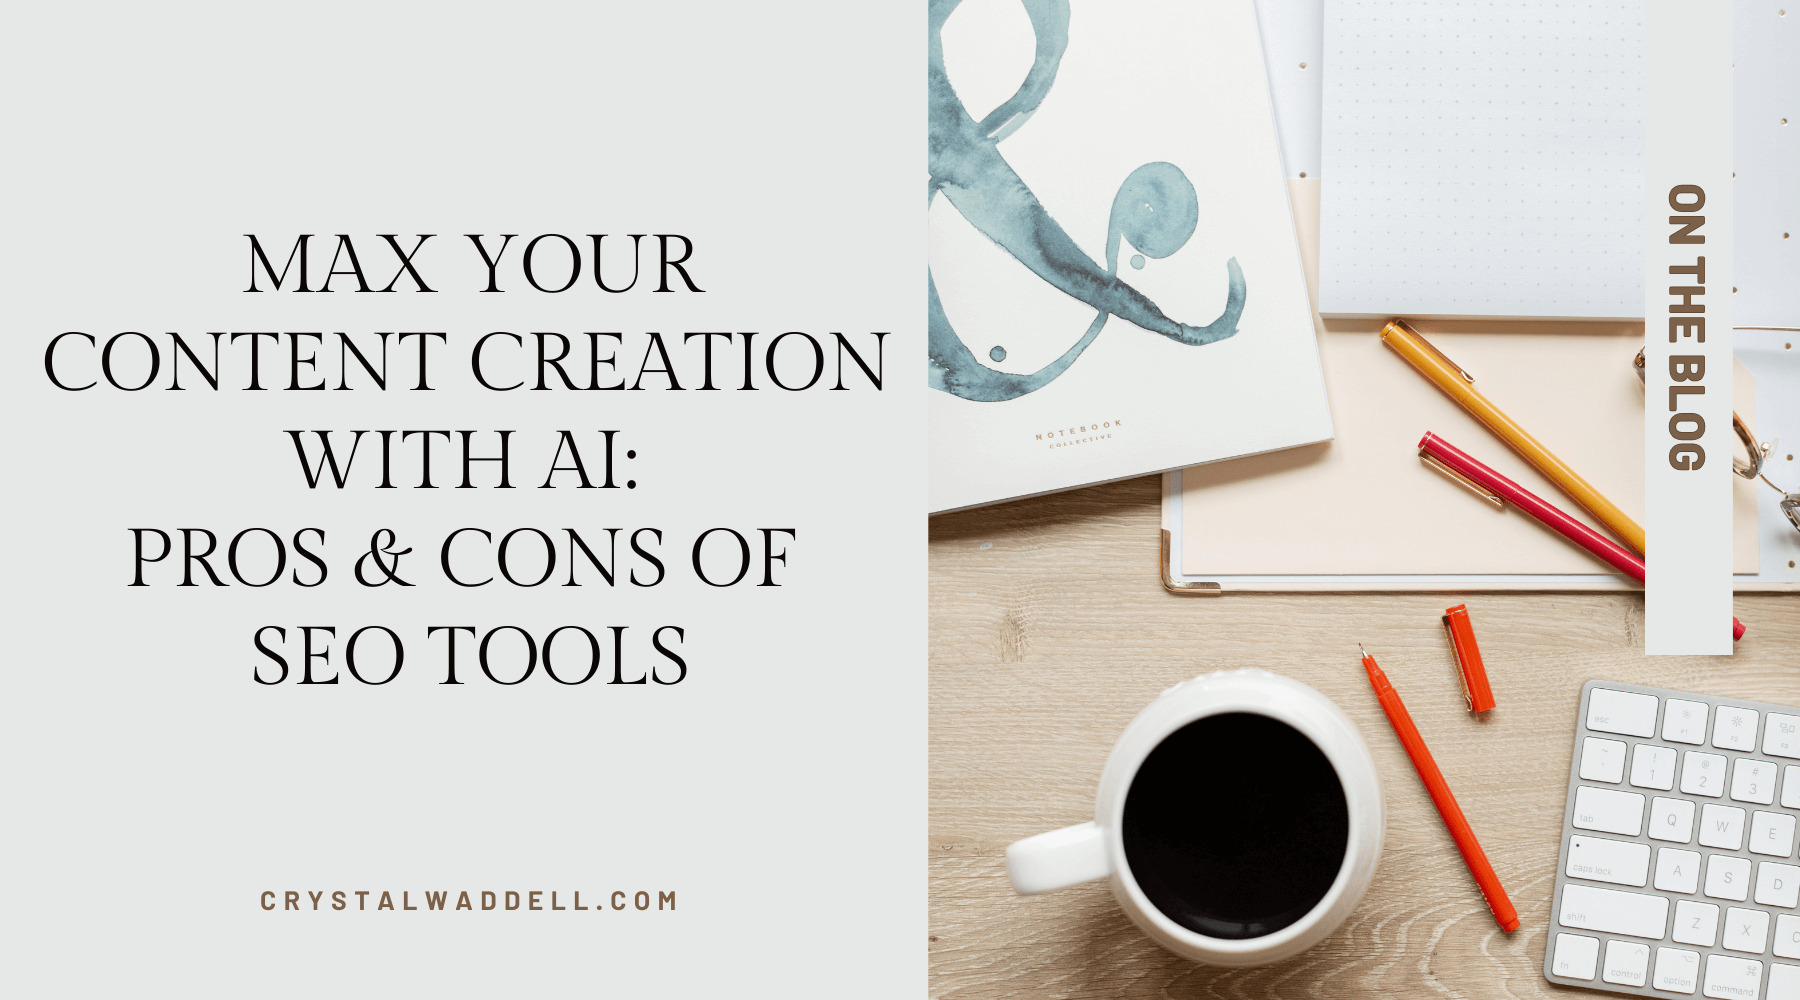 learn how AI tools can help you create more great content, faster!